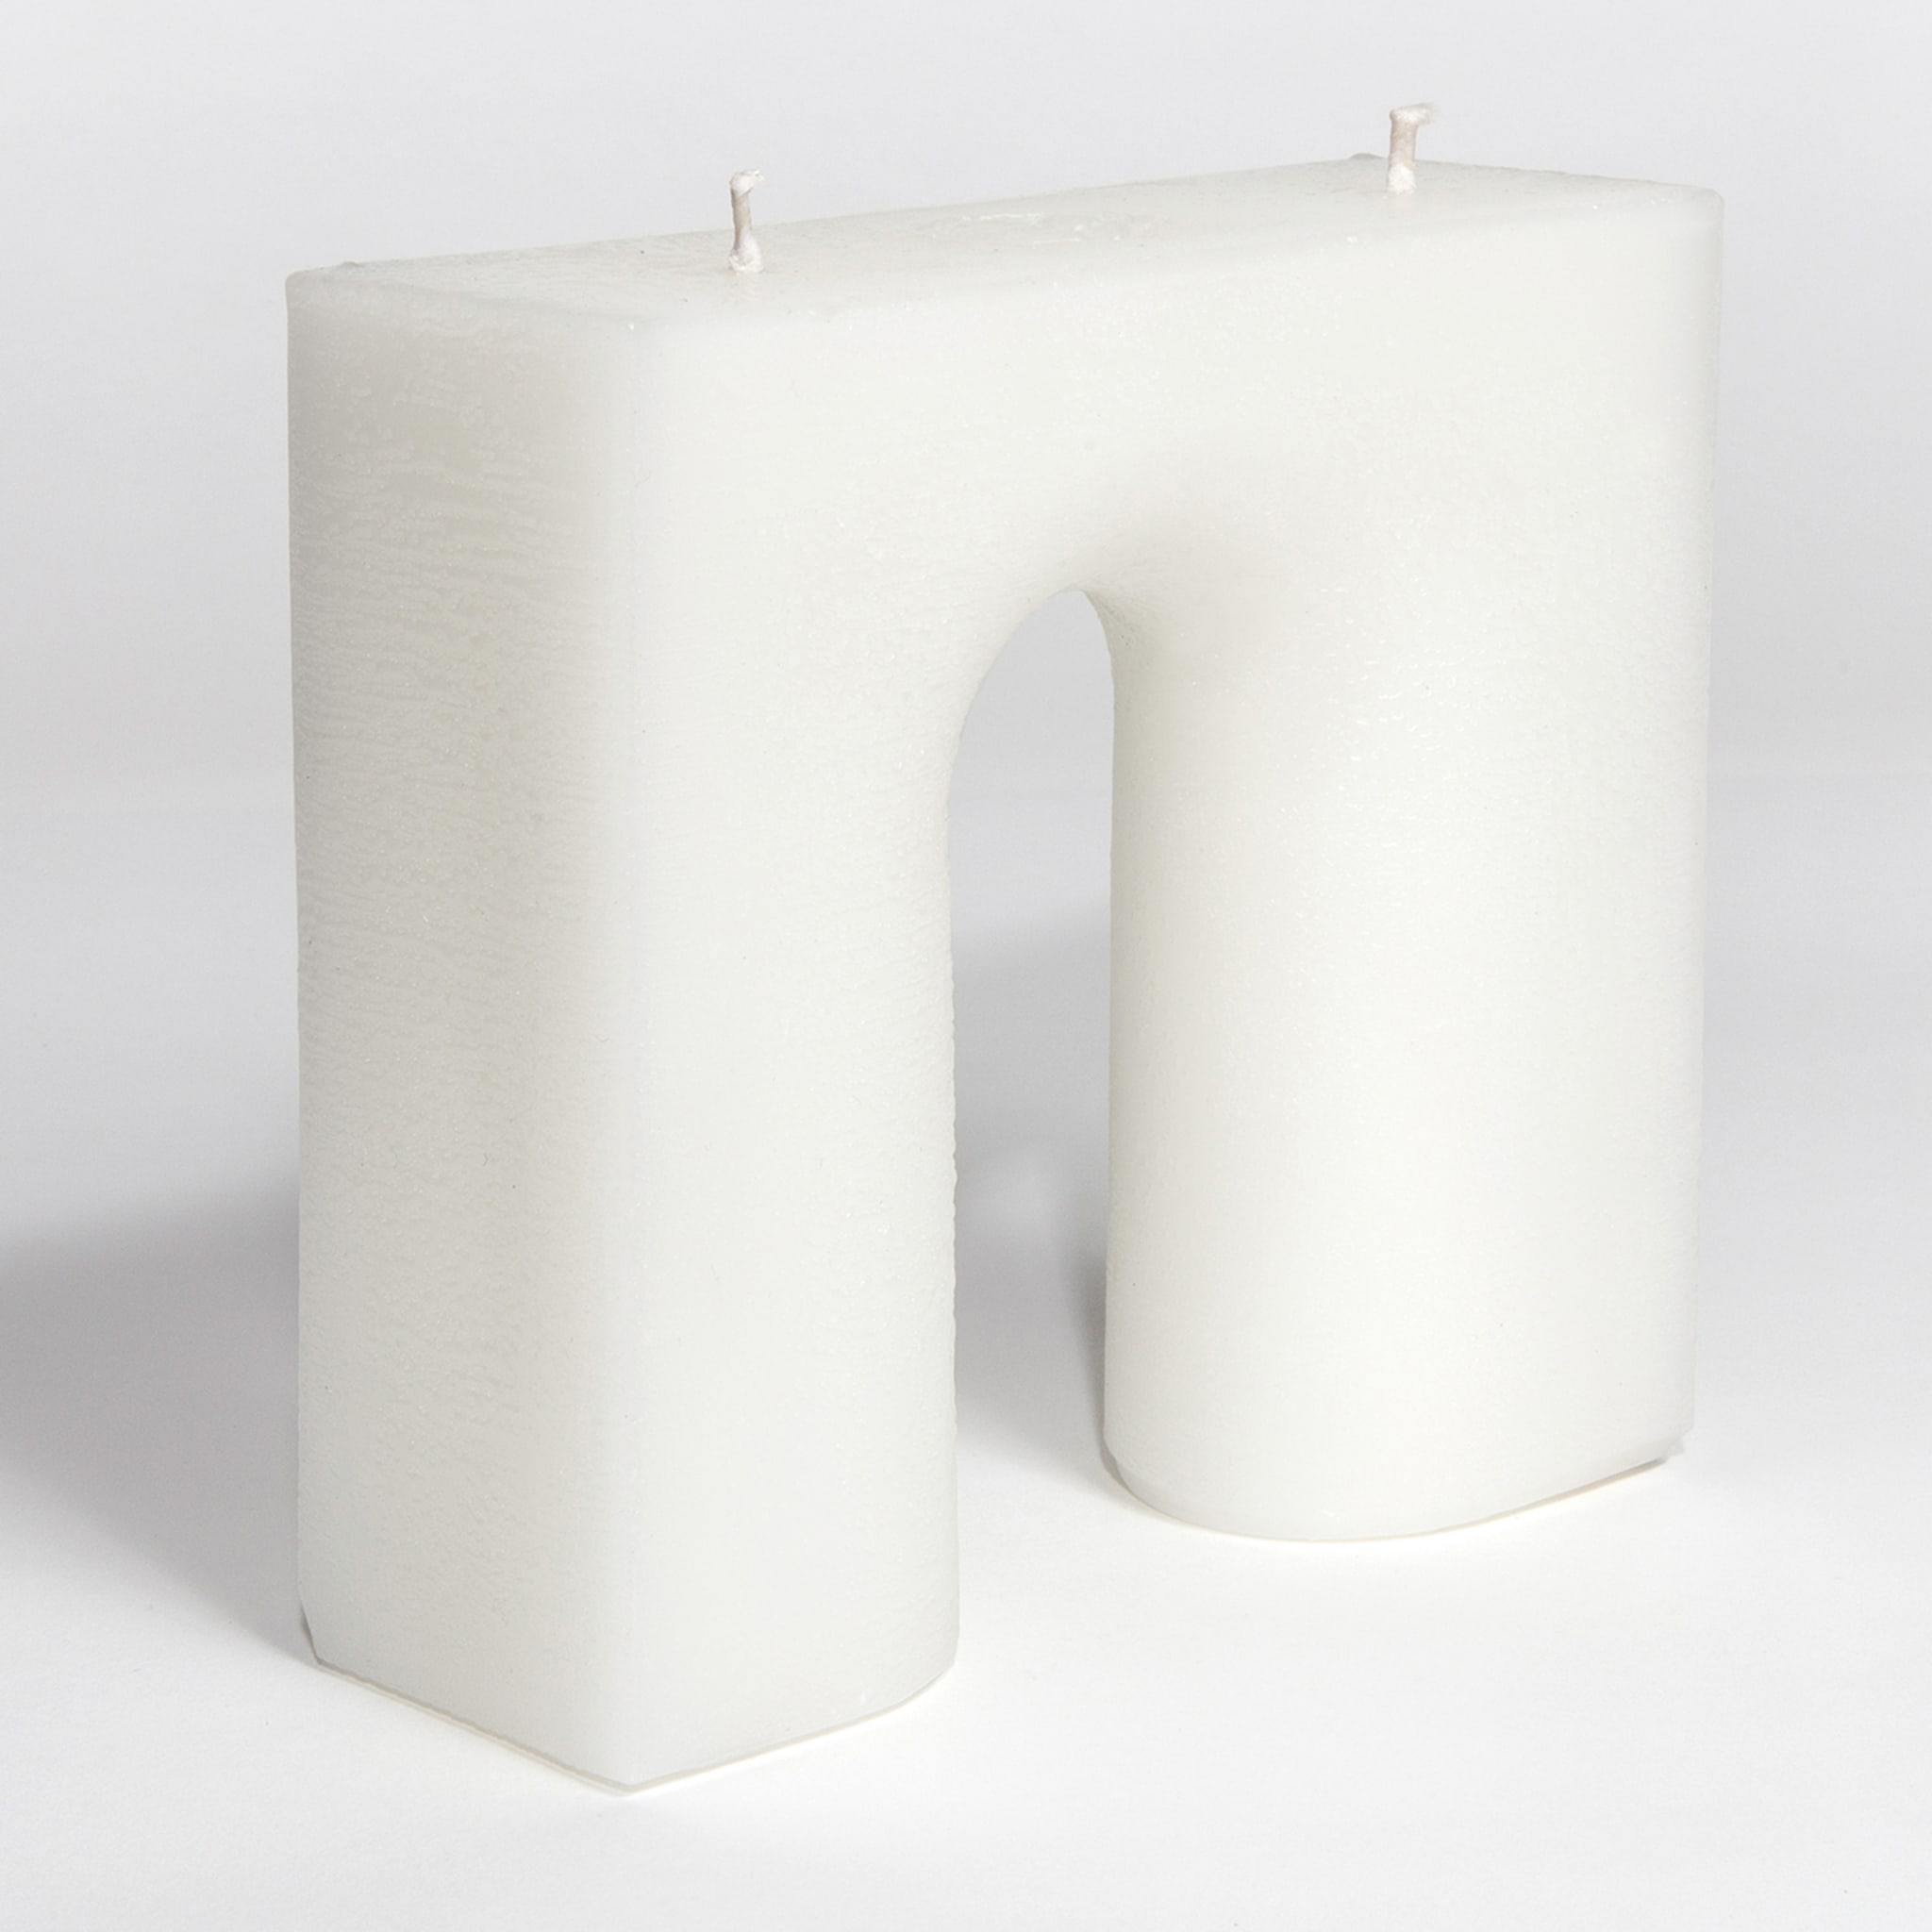 Trionfo Set of 2 White Candles - Alternative view 1